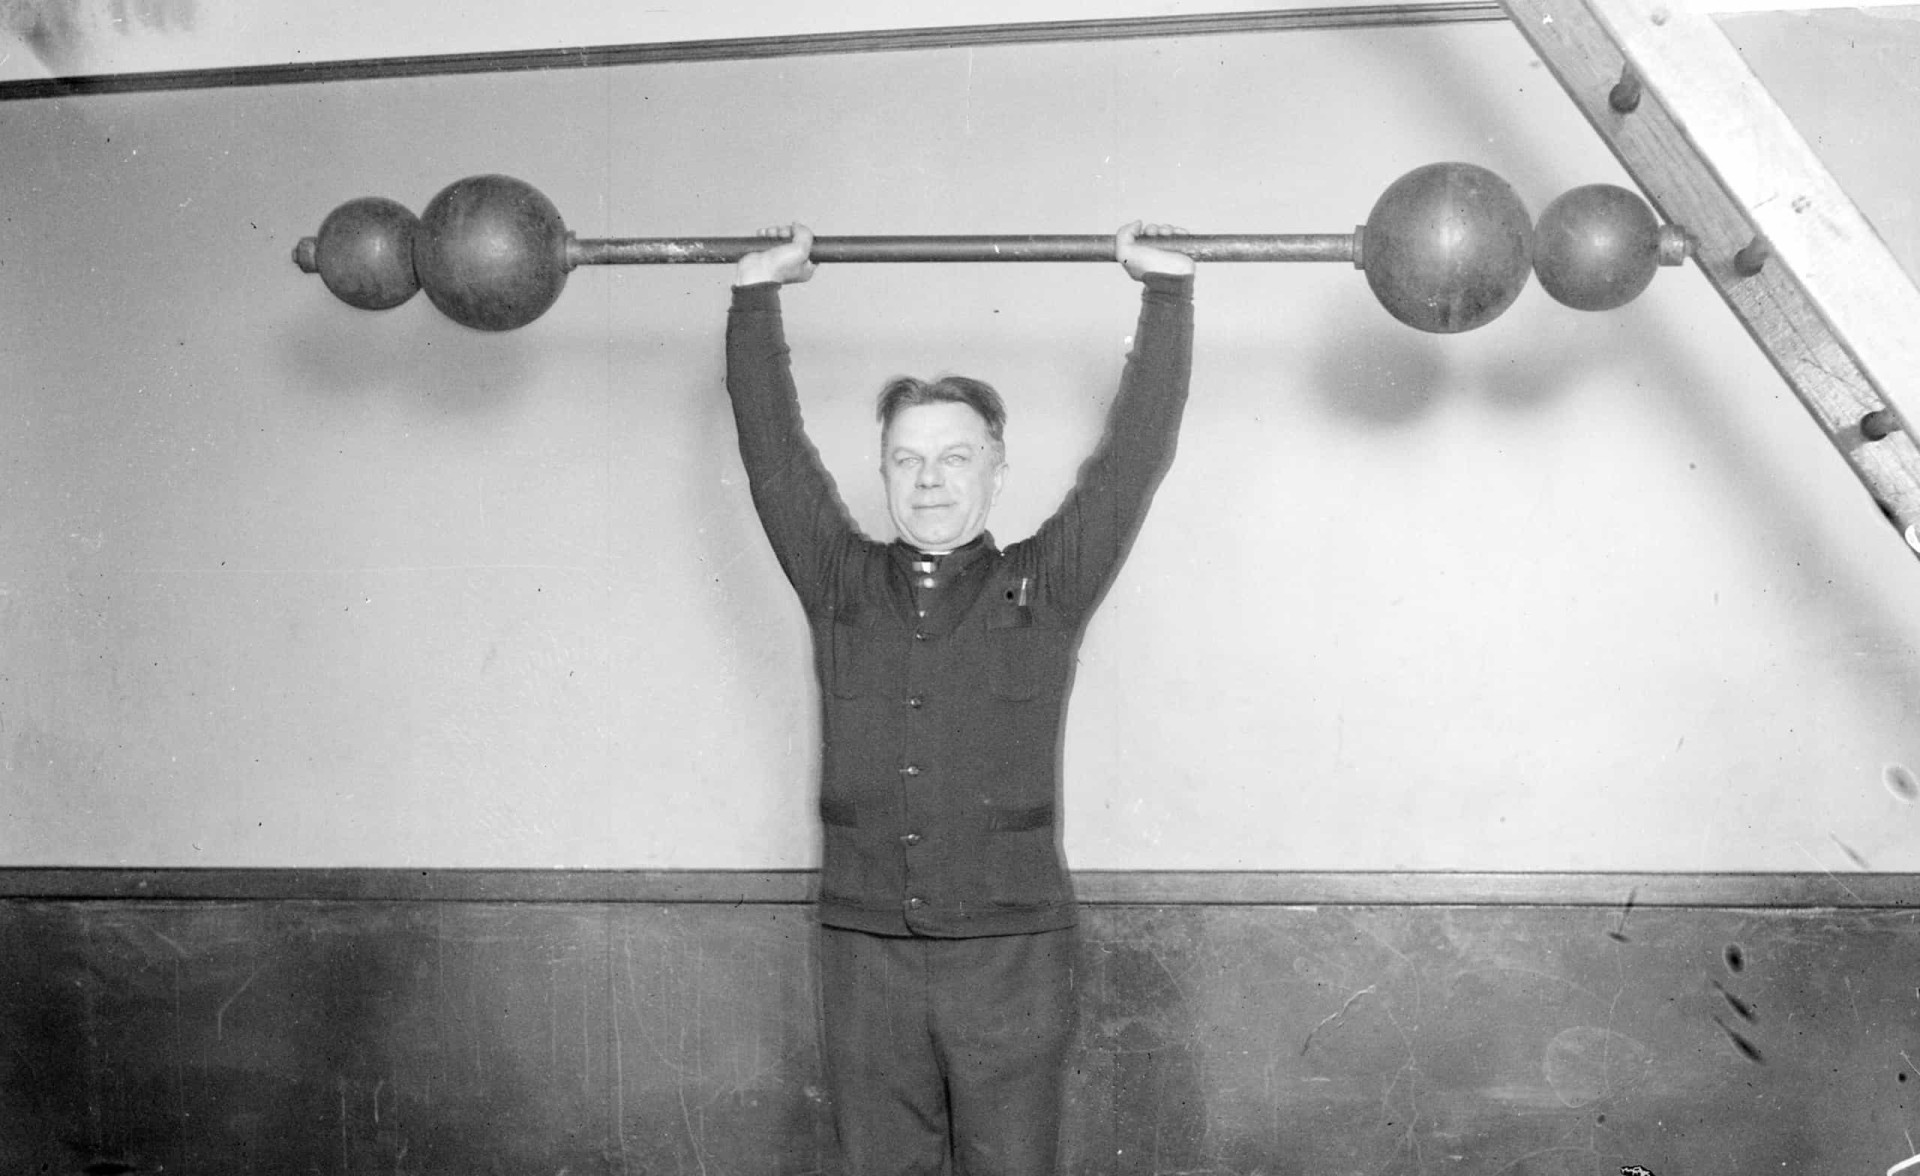 <p>Among gym equipment such as ropes, pommel horses, and dumbbells, the club also offered barbells called <em>Bares A spheres De 6 Kilos</em>. These are believed to be the first barbells made available to the public.</p>